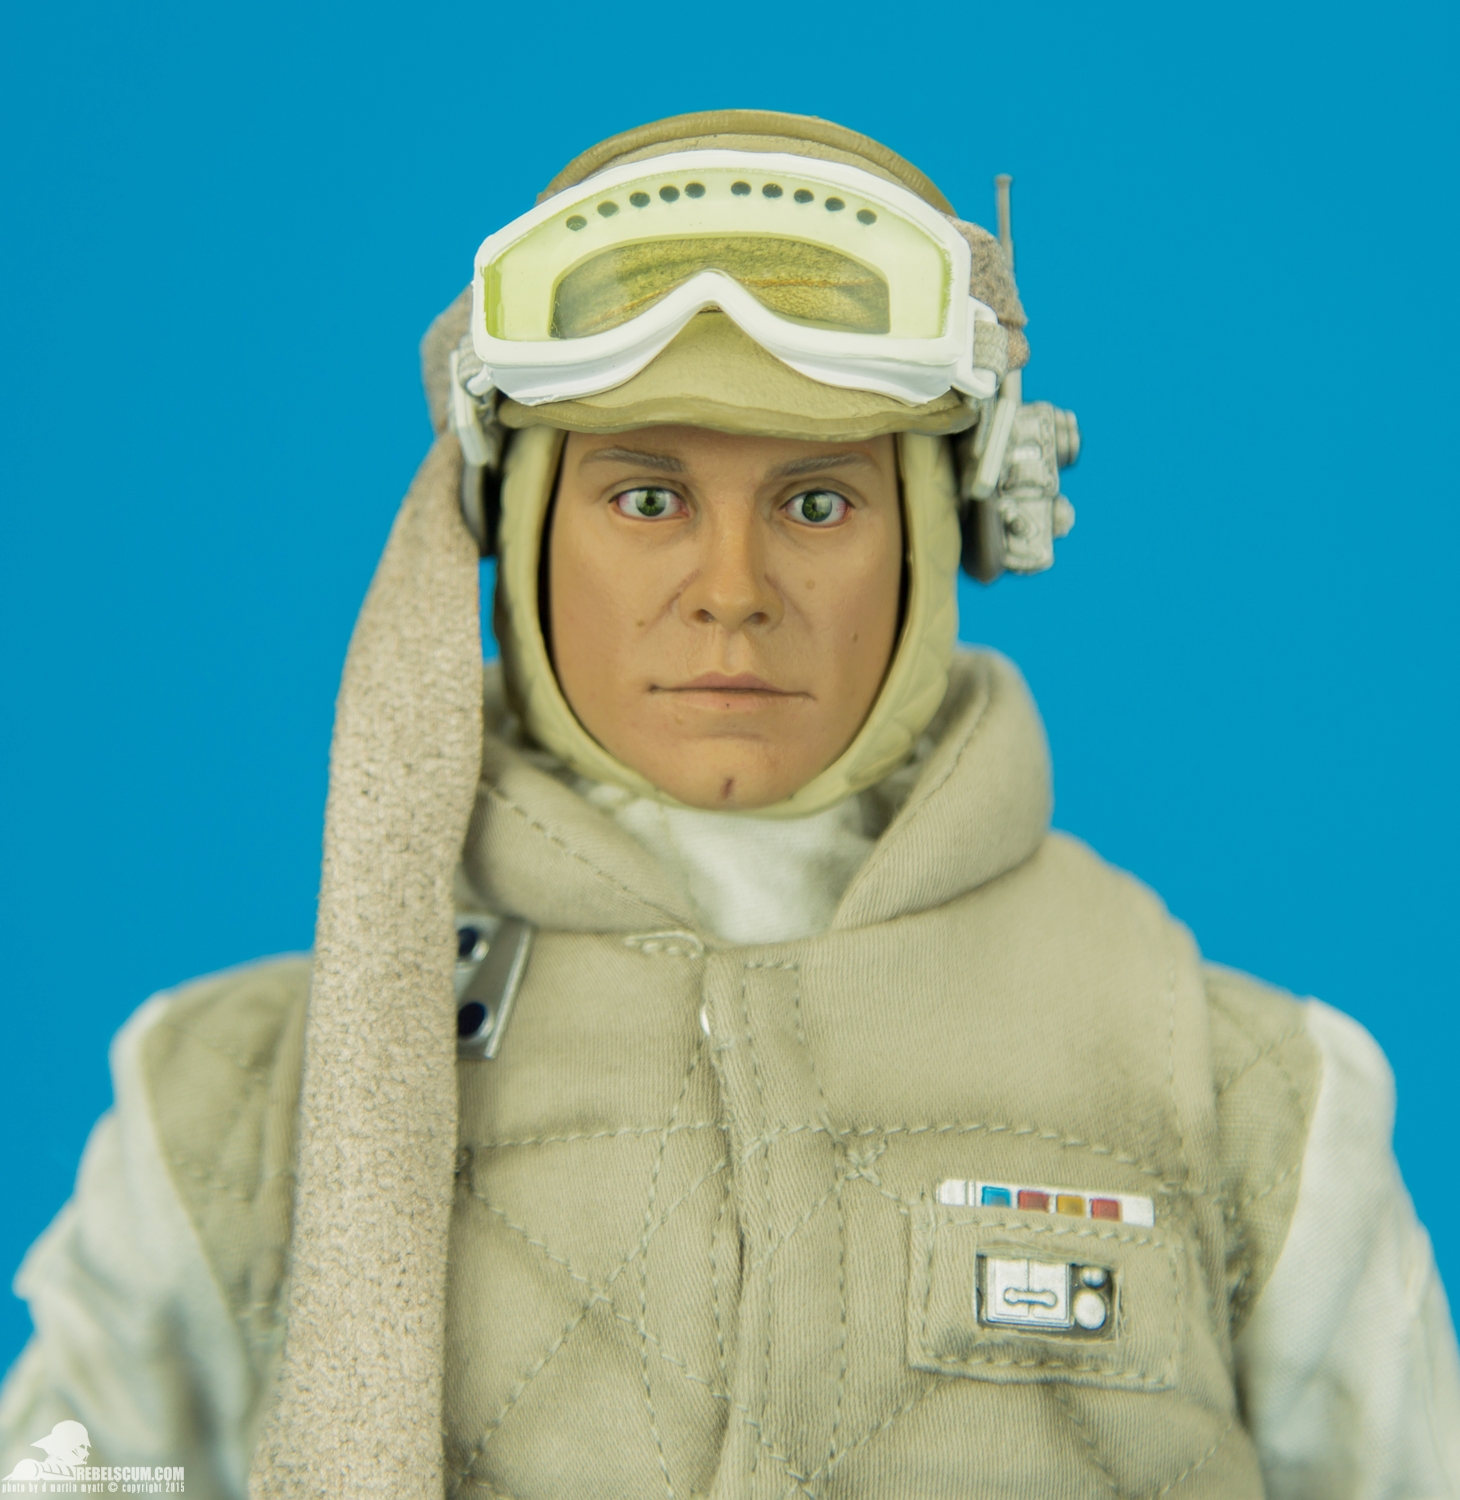 Luke-Skywalker-Hoth-Sixth-Scale-Sideshow-Collectibles-Star-Wars-017.jpg